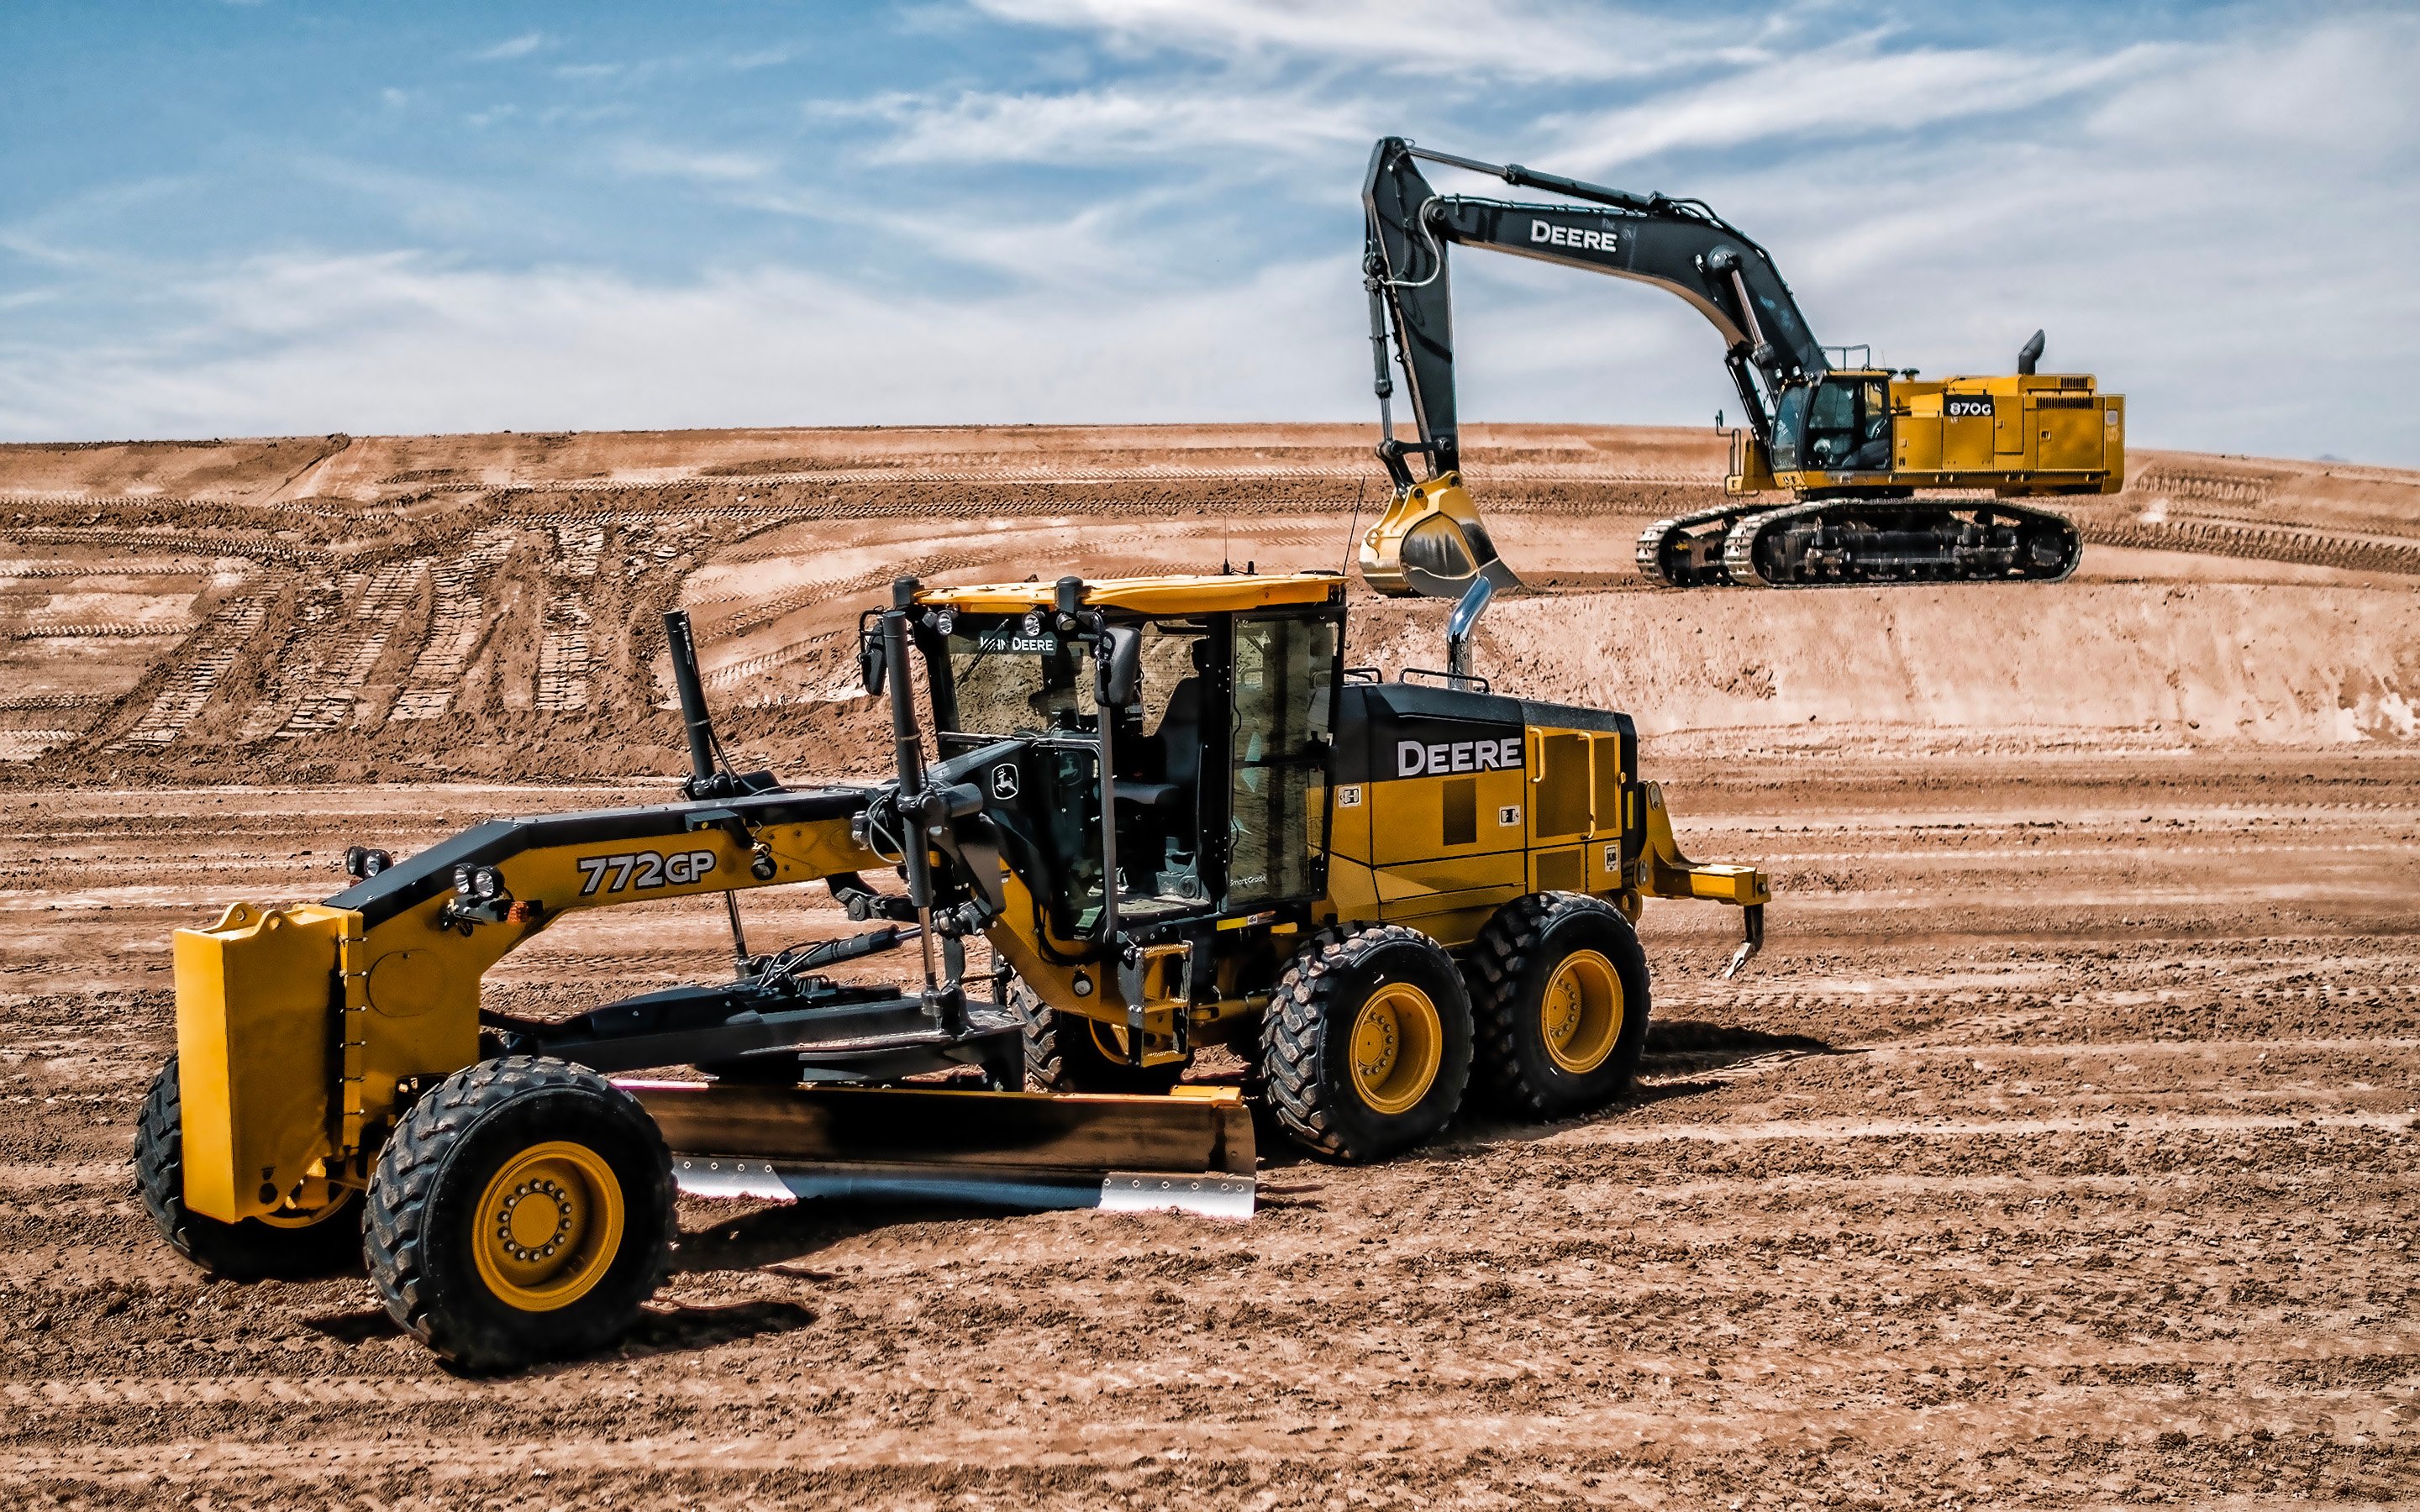 Download wallpapers John Deere 772GP, Motor Grader, construction equipment, road construction concepts, John Deere 870G, excavator, construction machines, John Deere for desktop with resolution 2880x1800. High Quality HD pictures wallpapers